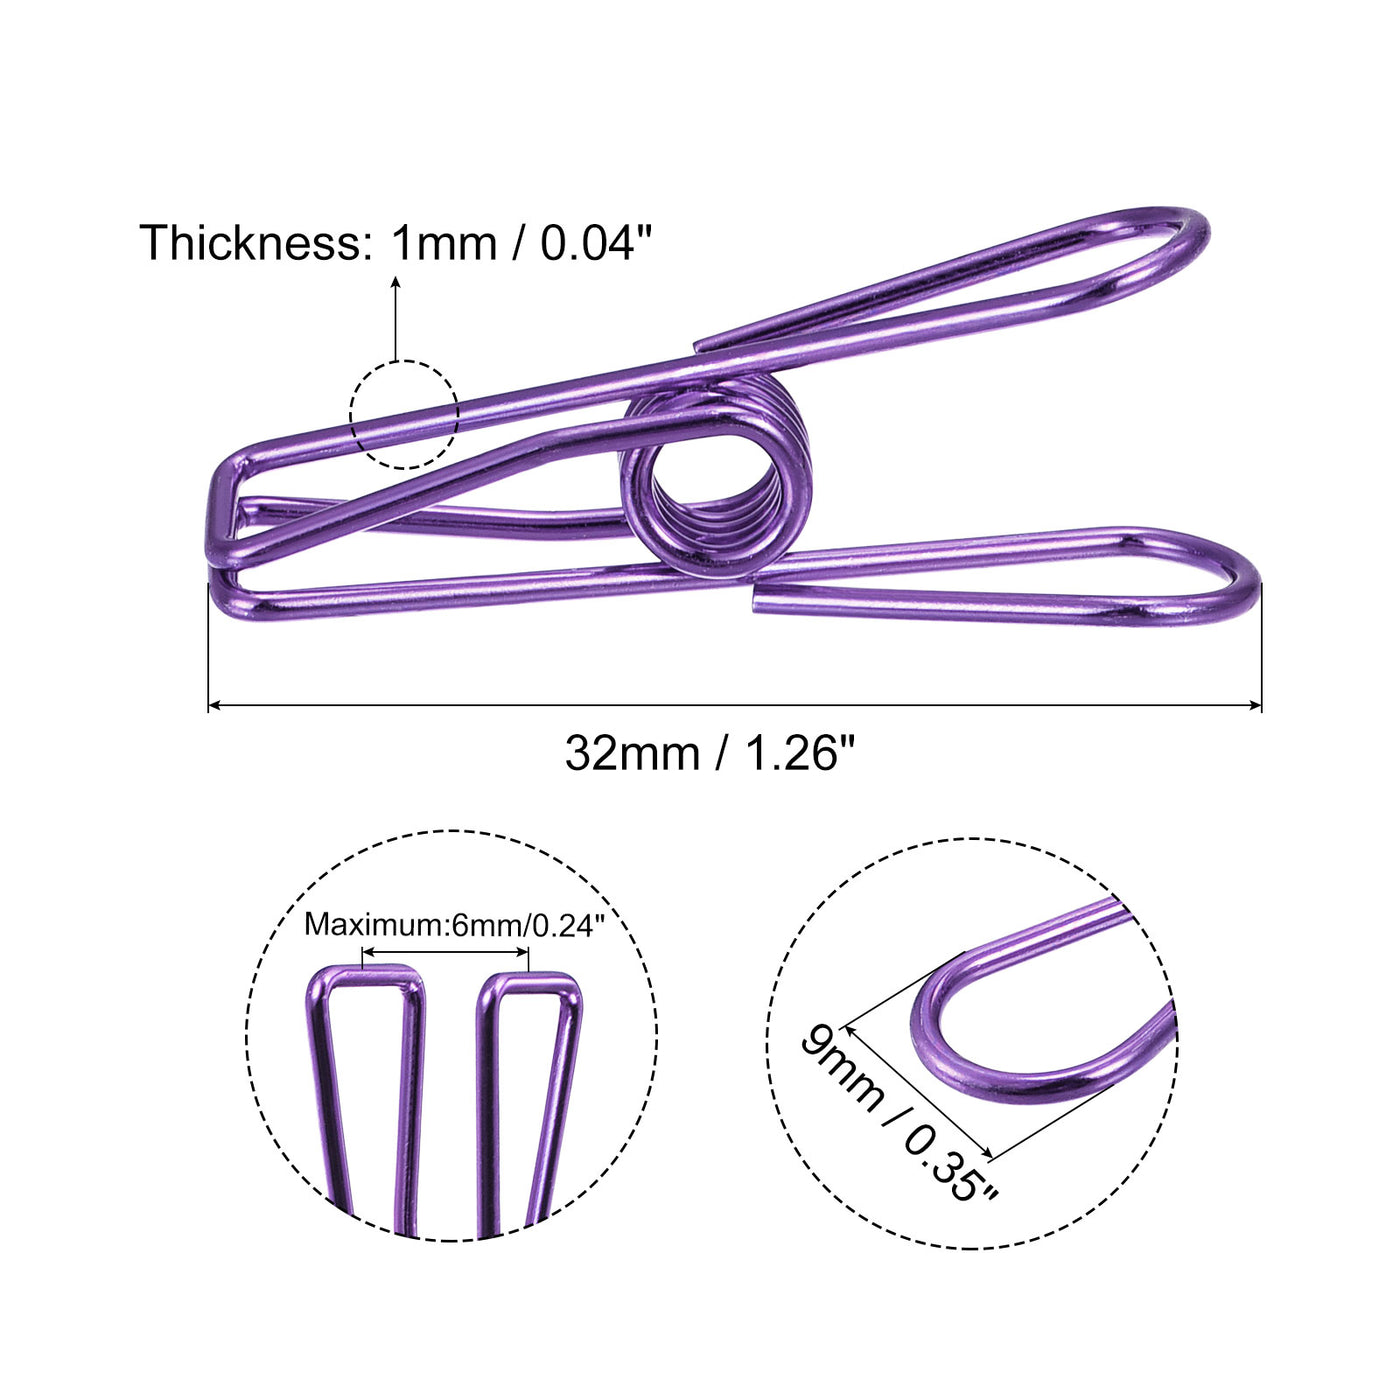 uxcell Uxcell Tablecloth Clips, 32mm Carbon Steel Clamps for Fixing Table Cloth, Purple 16 Pcs